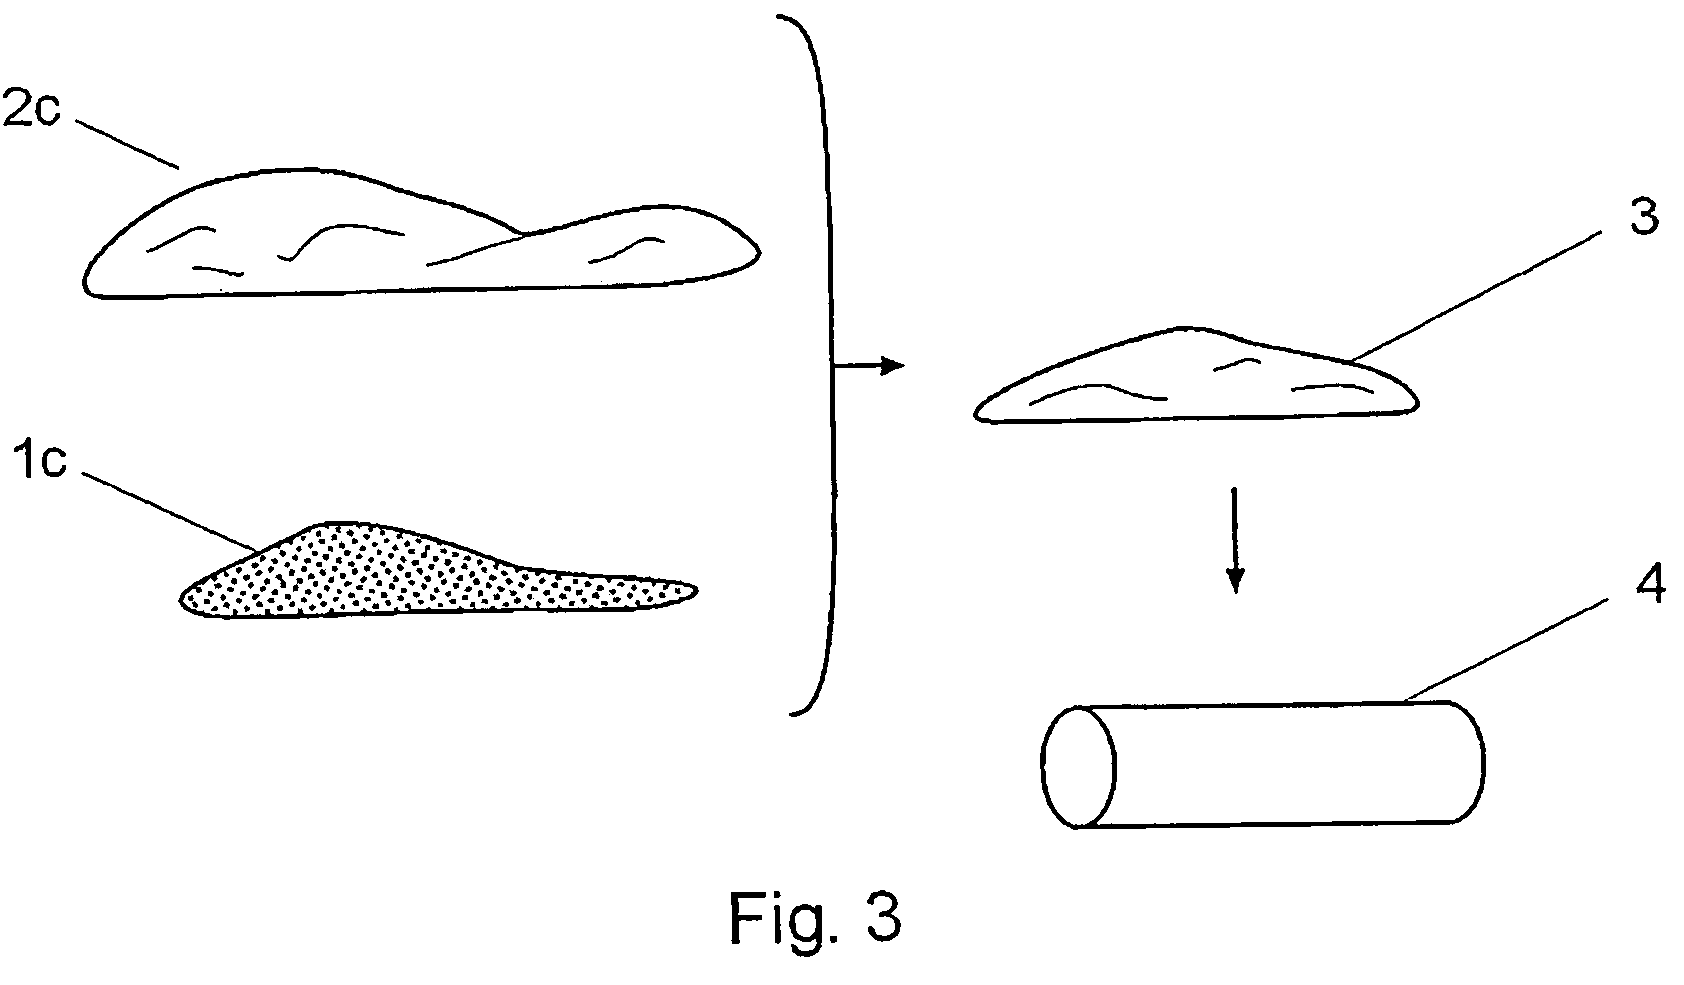 Method of Producing Protective Cable Sheaths, Tubes and Similar